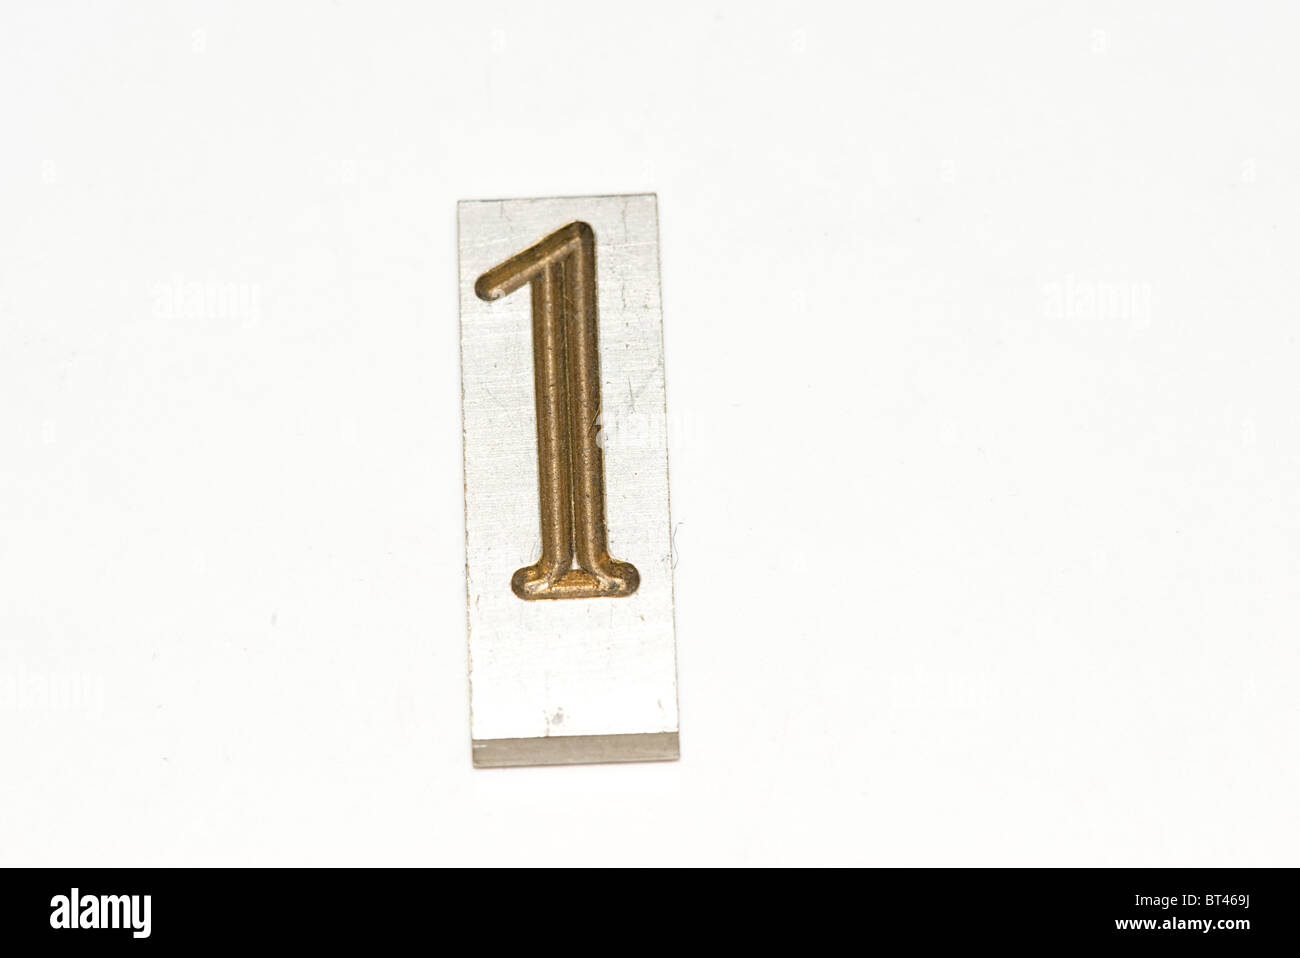 Number used for engraving Stock Photo